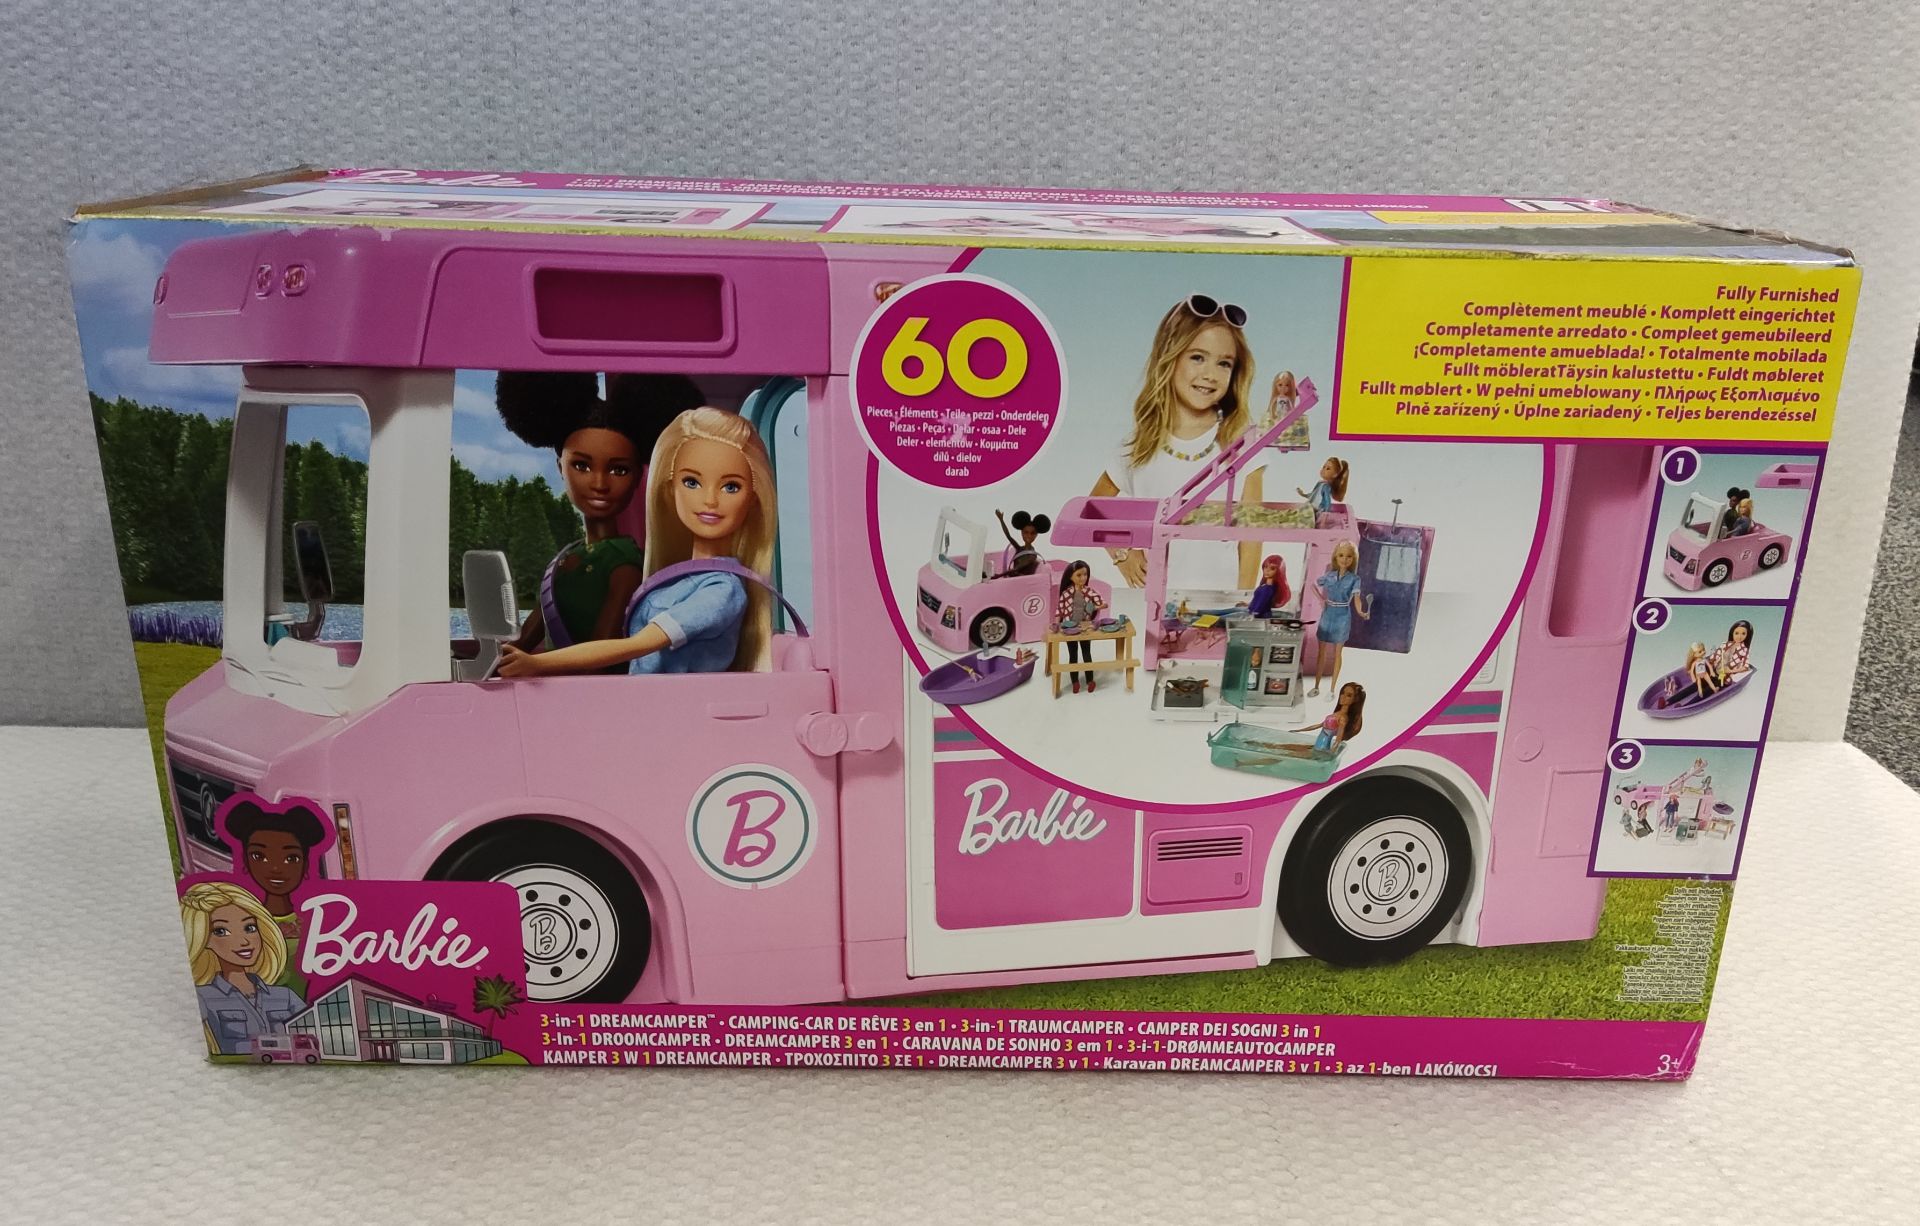 1 x Barbie 3-in-1 Dreamcamper - New/Boxed - Image 2 of 8